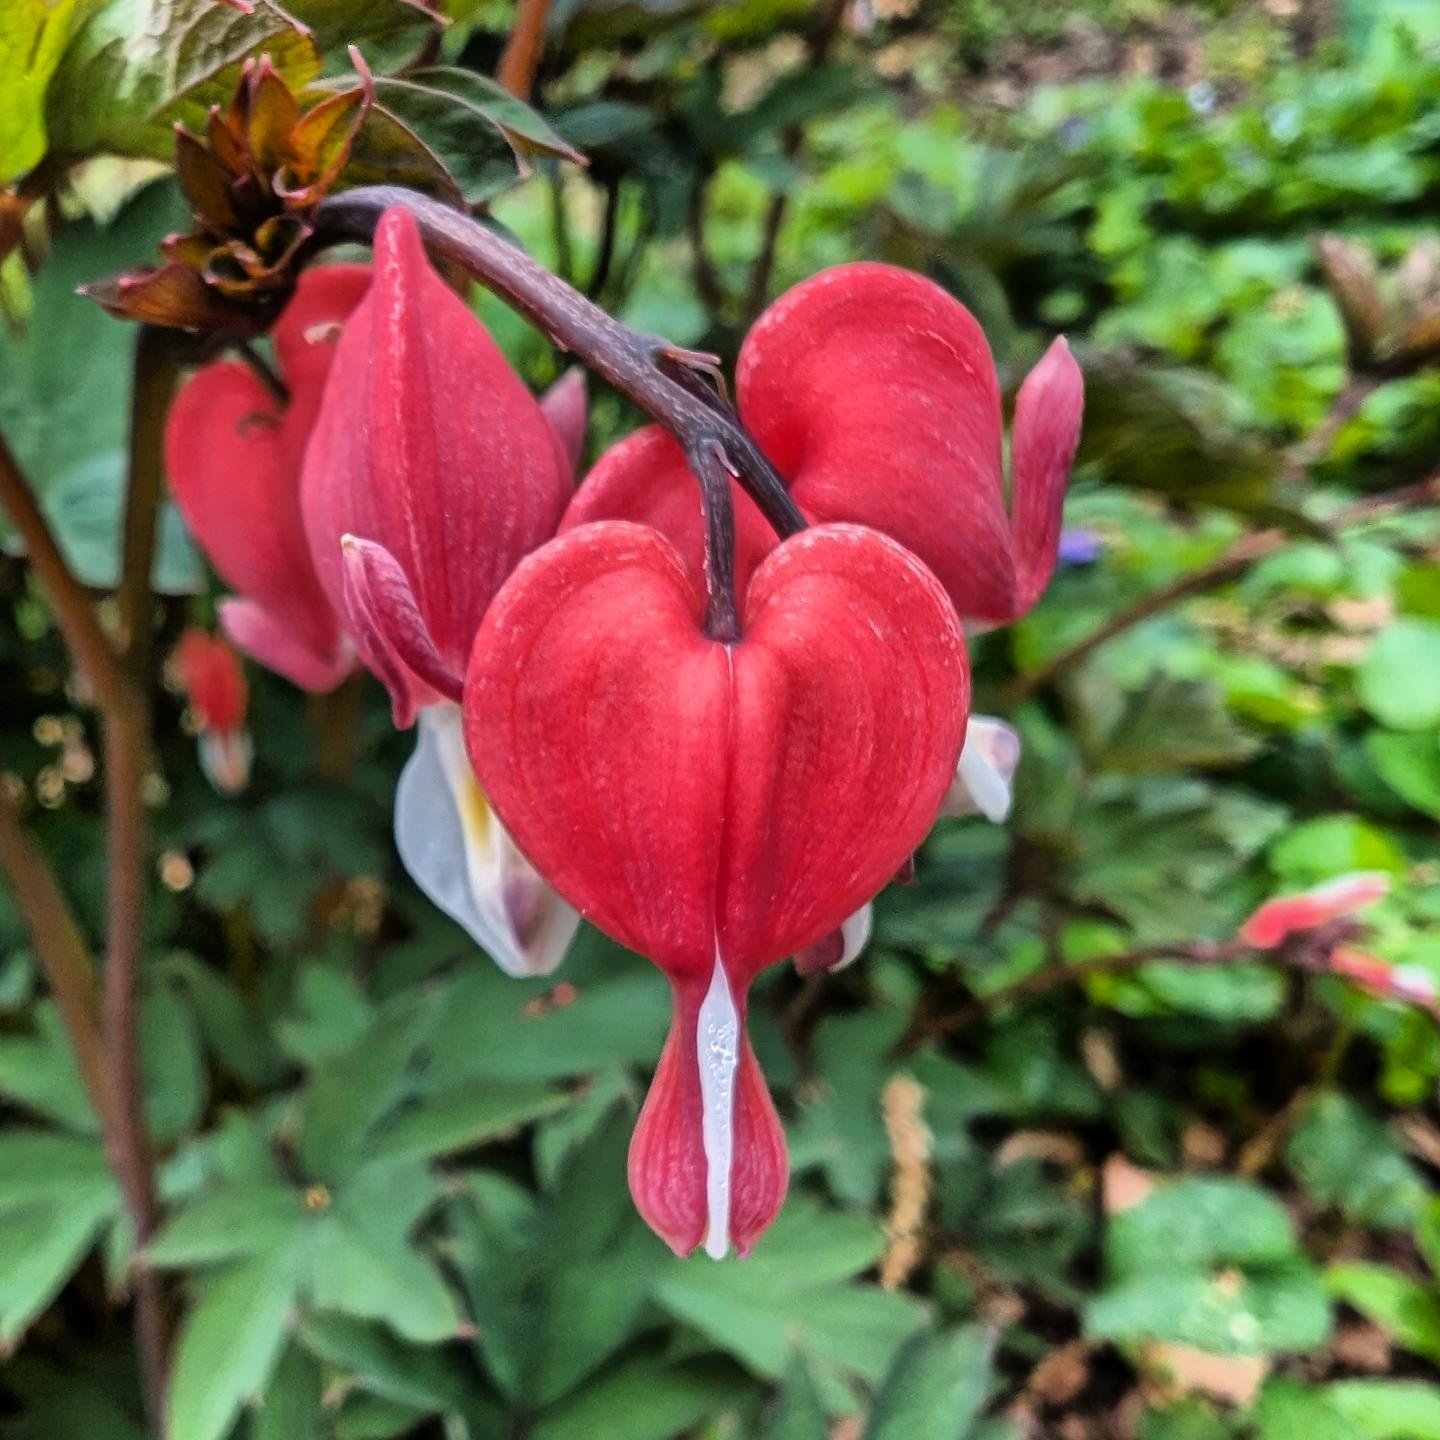 Dicentra Valentine has red flowers against a purple/green foliage. Such a dramatic plant!
-
Bleeding hearts bloom mostly in the Spring and prefer shade to half sun locations.
-
Do you want this and many more beautiful plants?
schedule a consultation 